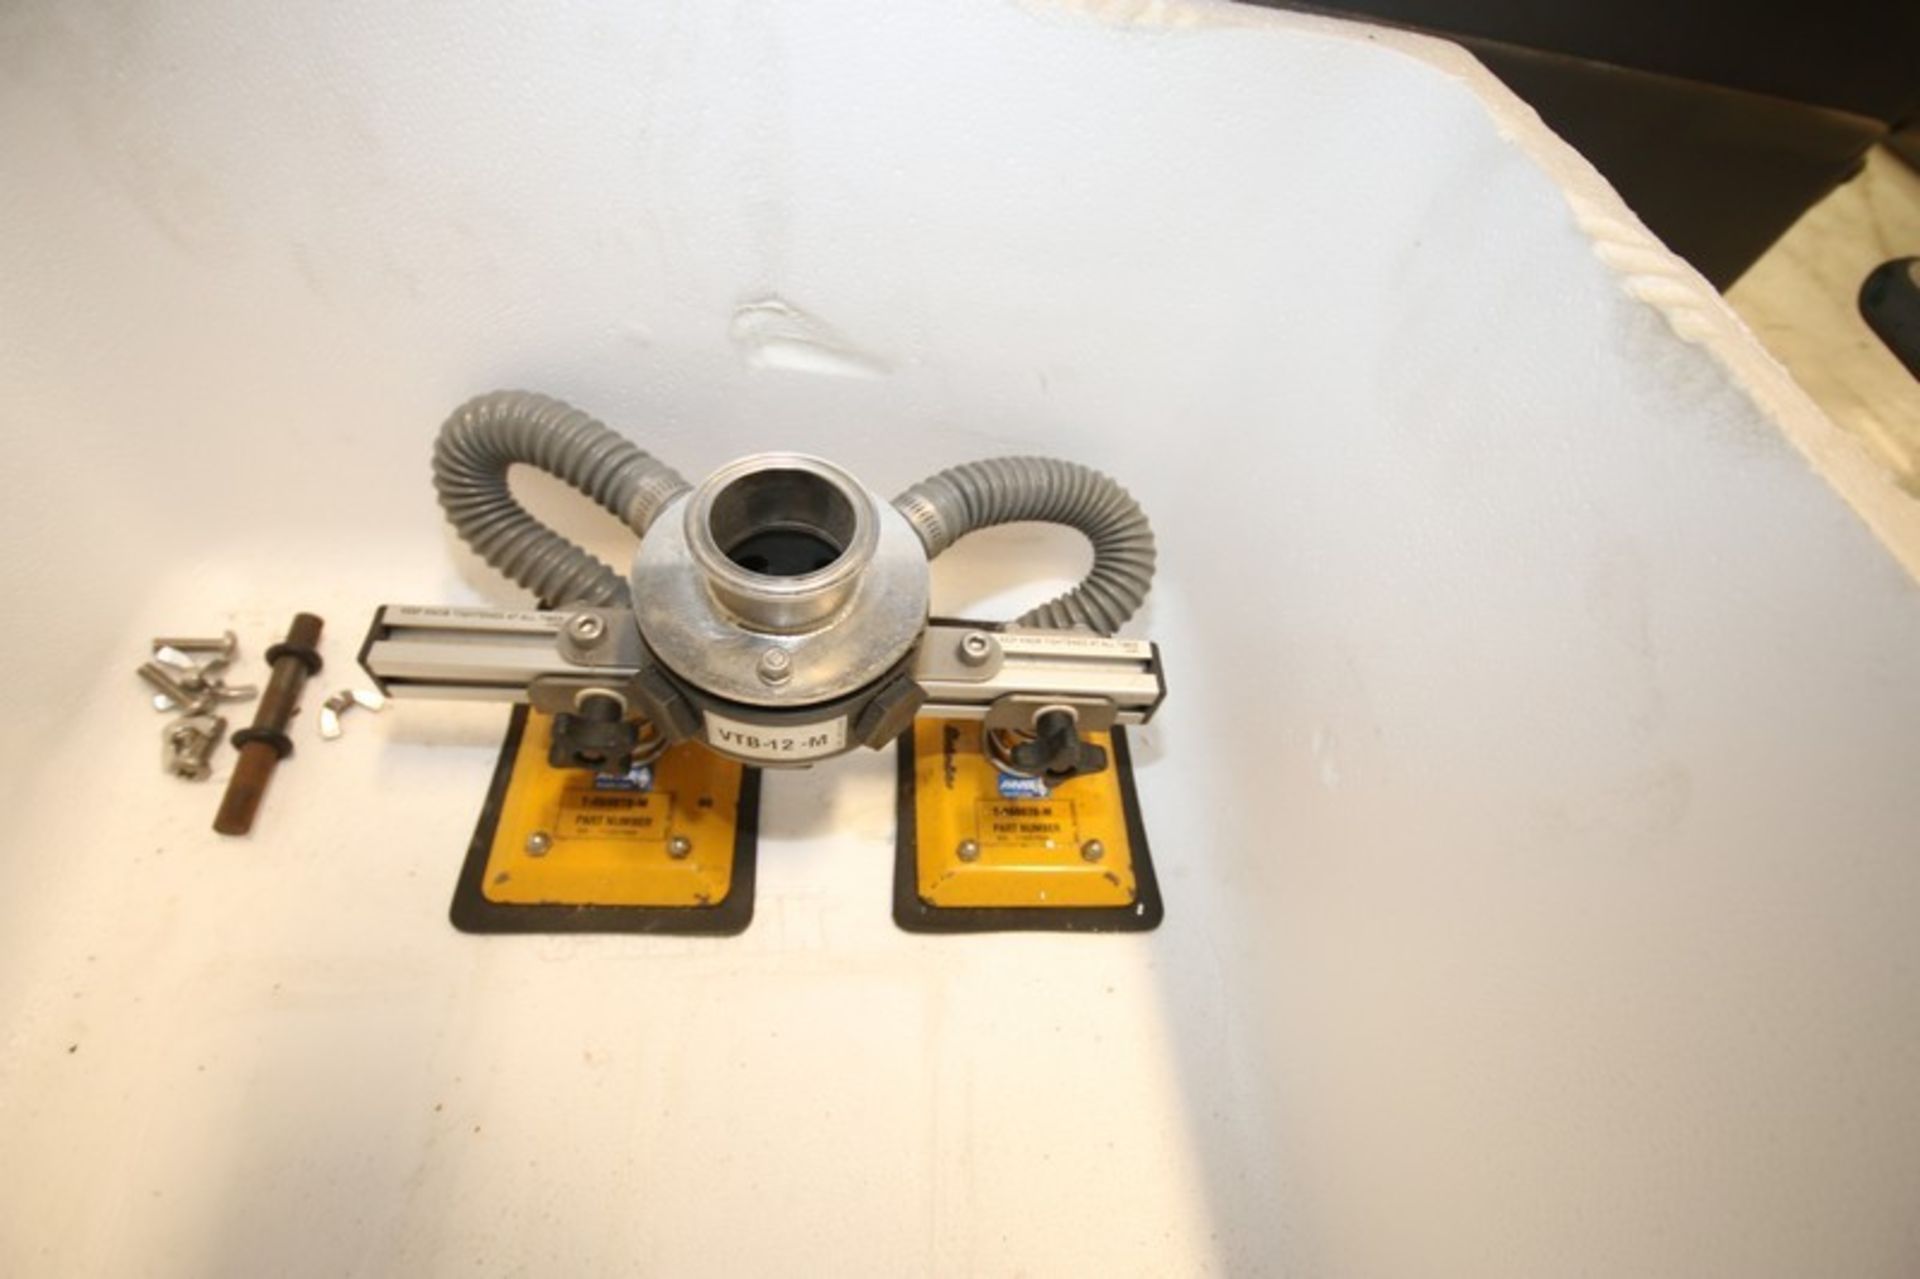 Anver Vacuum Lifting System with VT100-2.5-D7Lifter & VB-7 Vacuum Generator, Includes Model VTB-12-M - Image 4 of 4